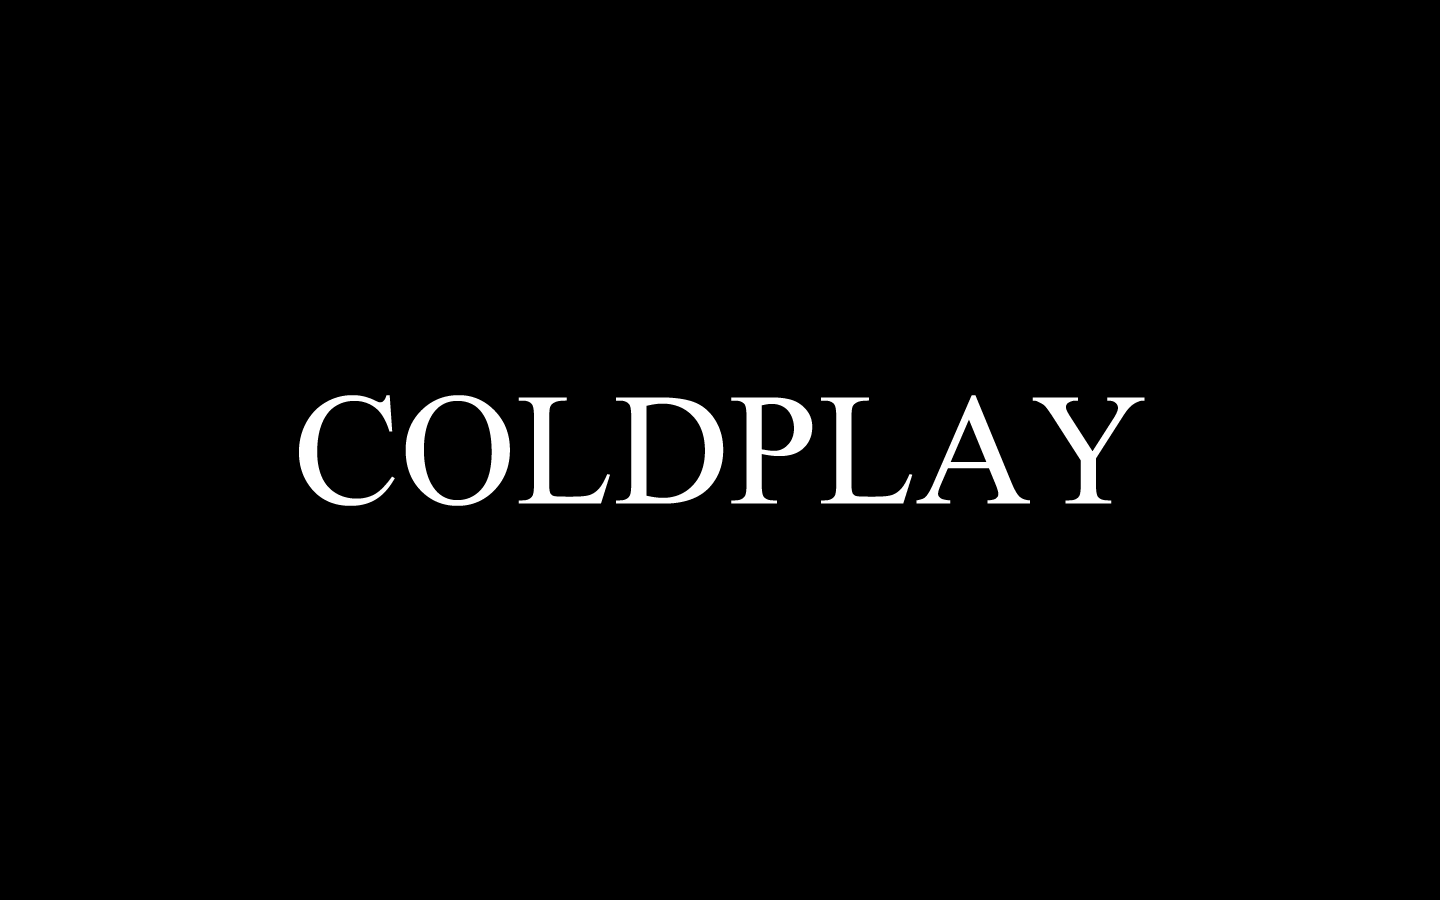 Coldplay Widescreen Wallpaper Black 1440 X 900 Pictures, Images ...